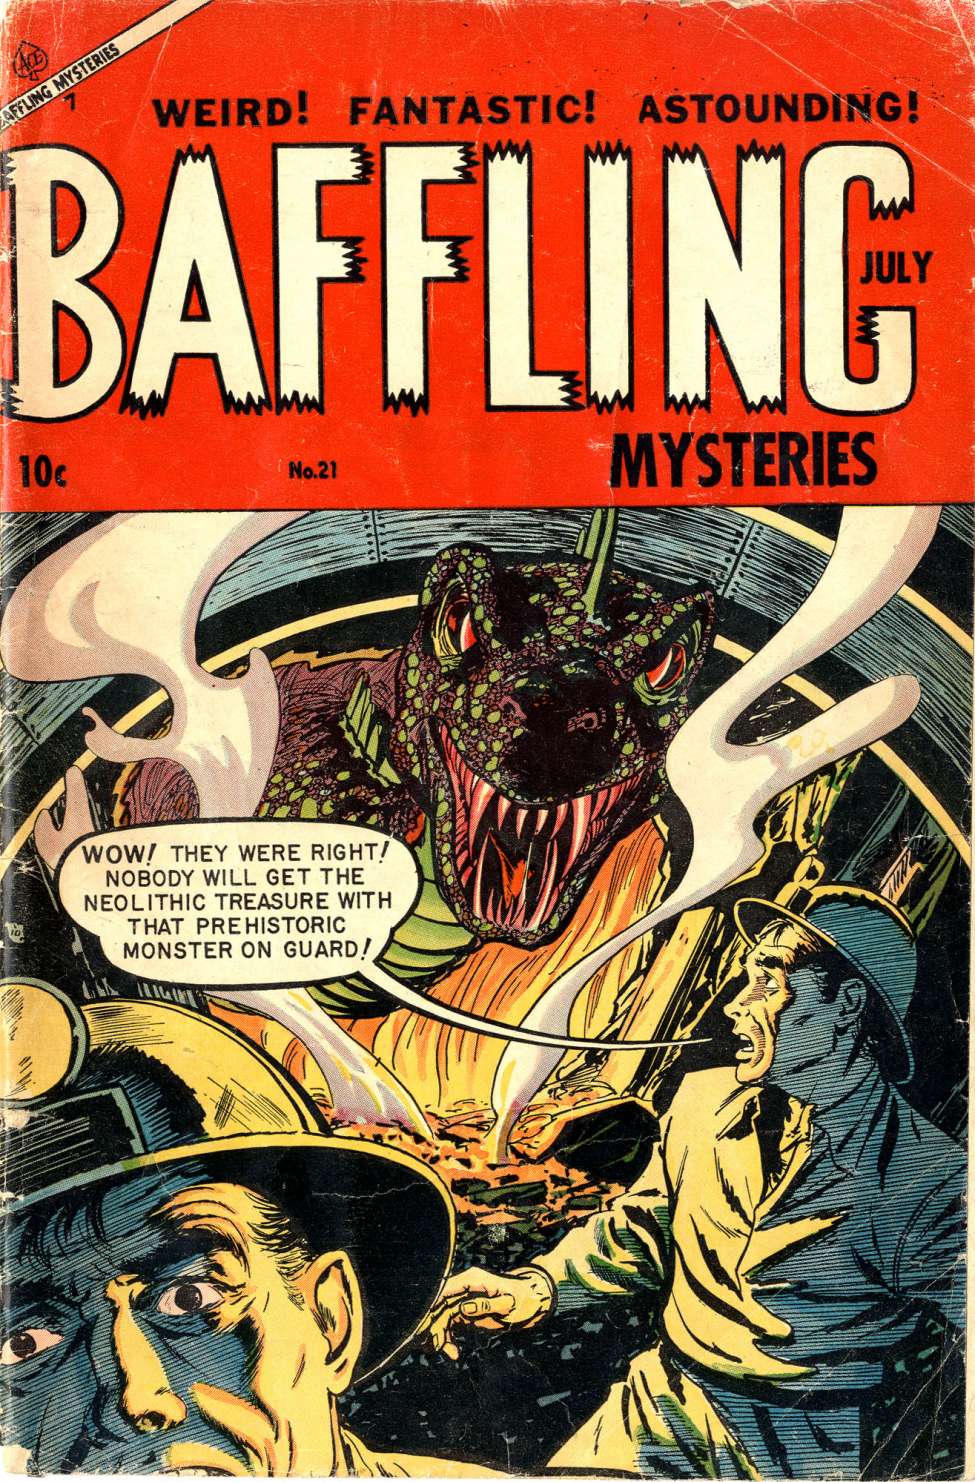 Comic Book Cover For Baffling Mysteries 21